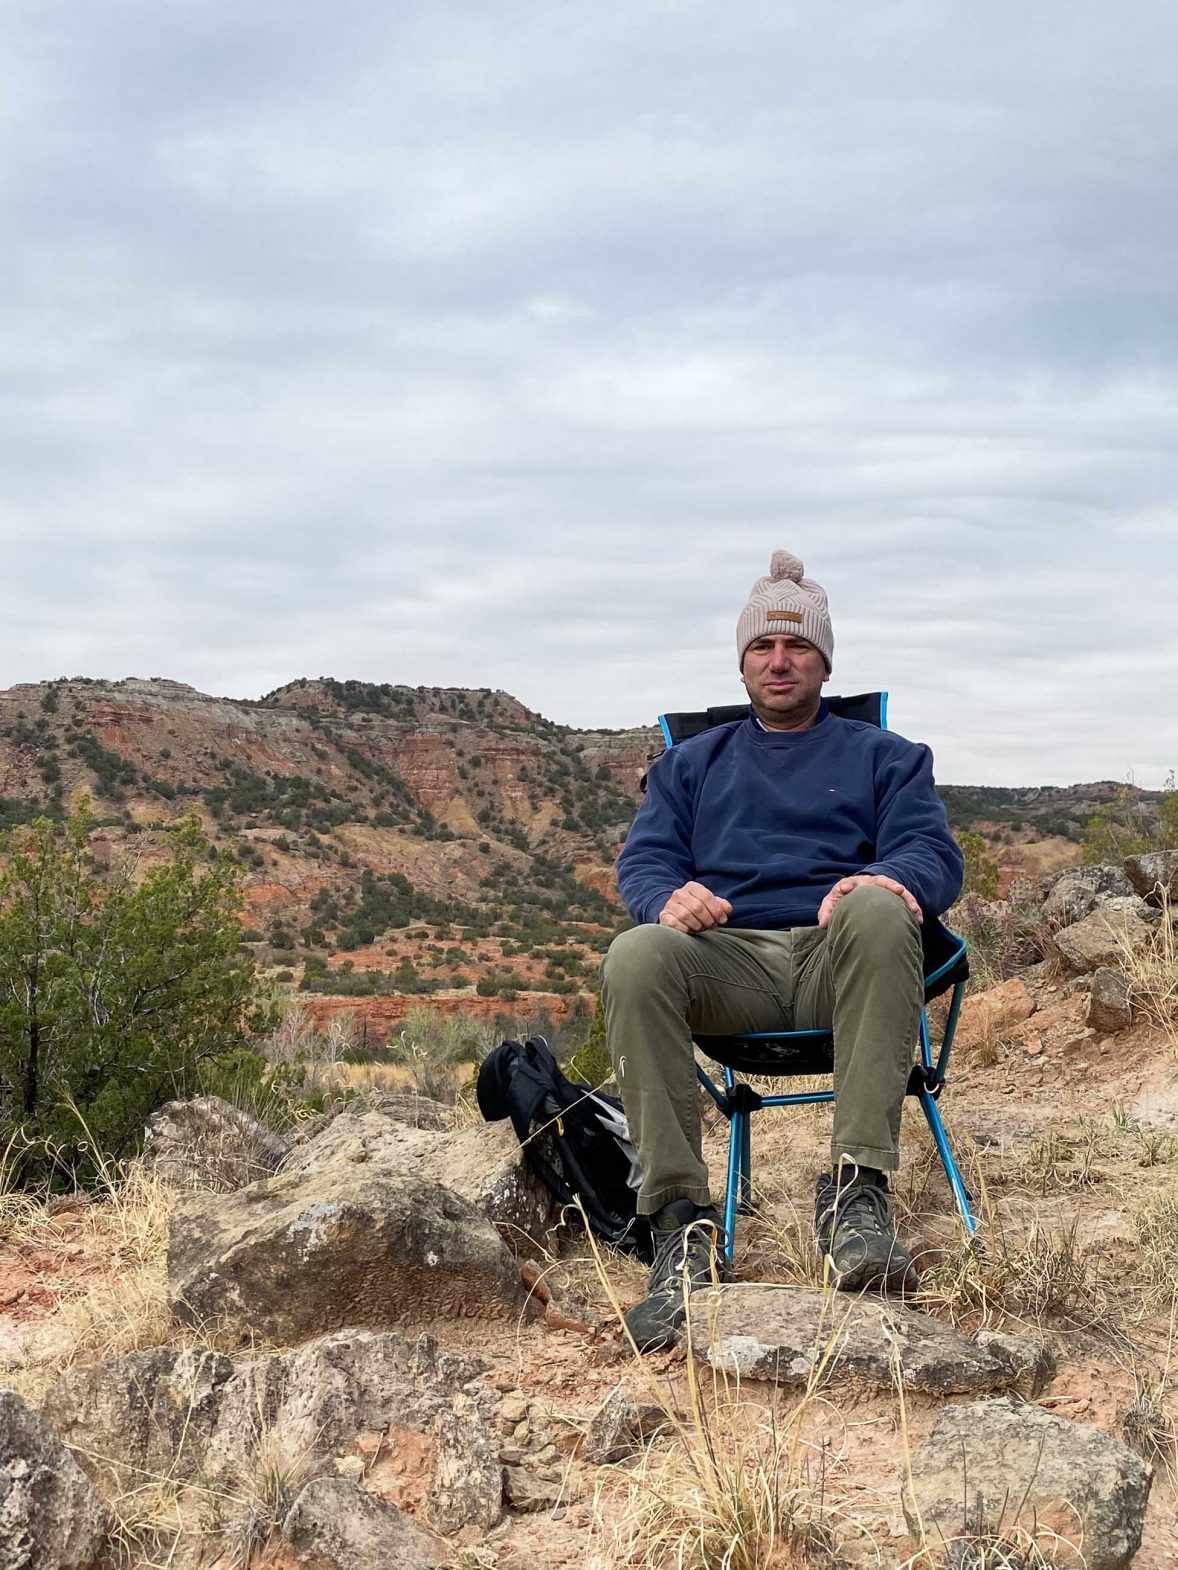 Robby in his chair with fairly dry hills behind him.